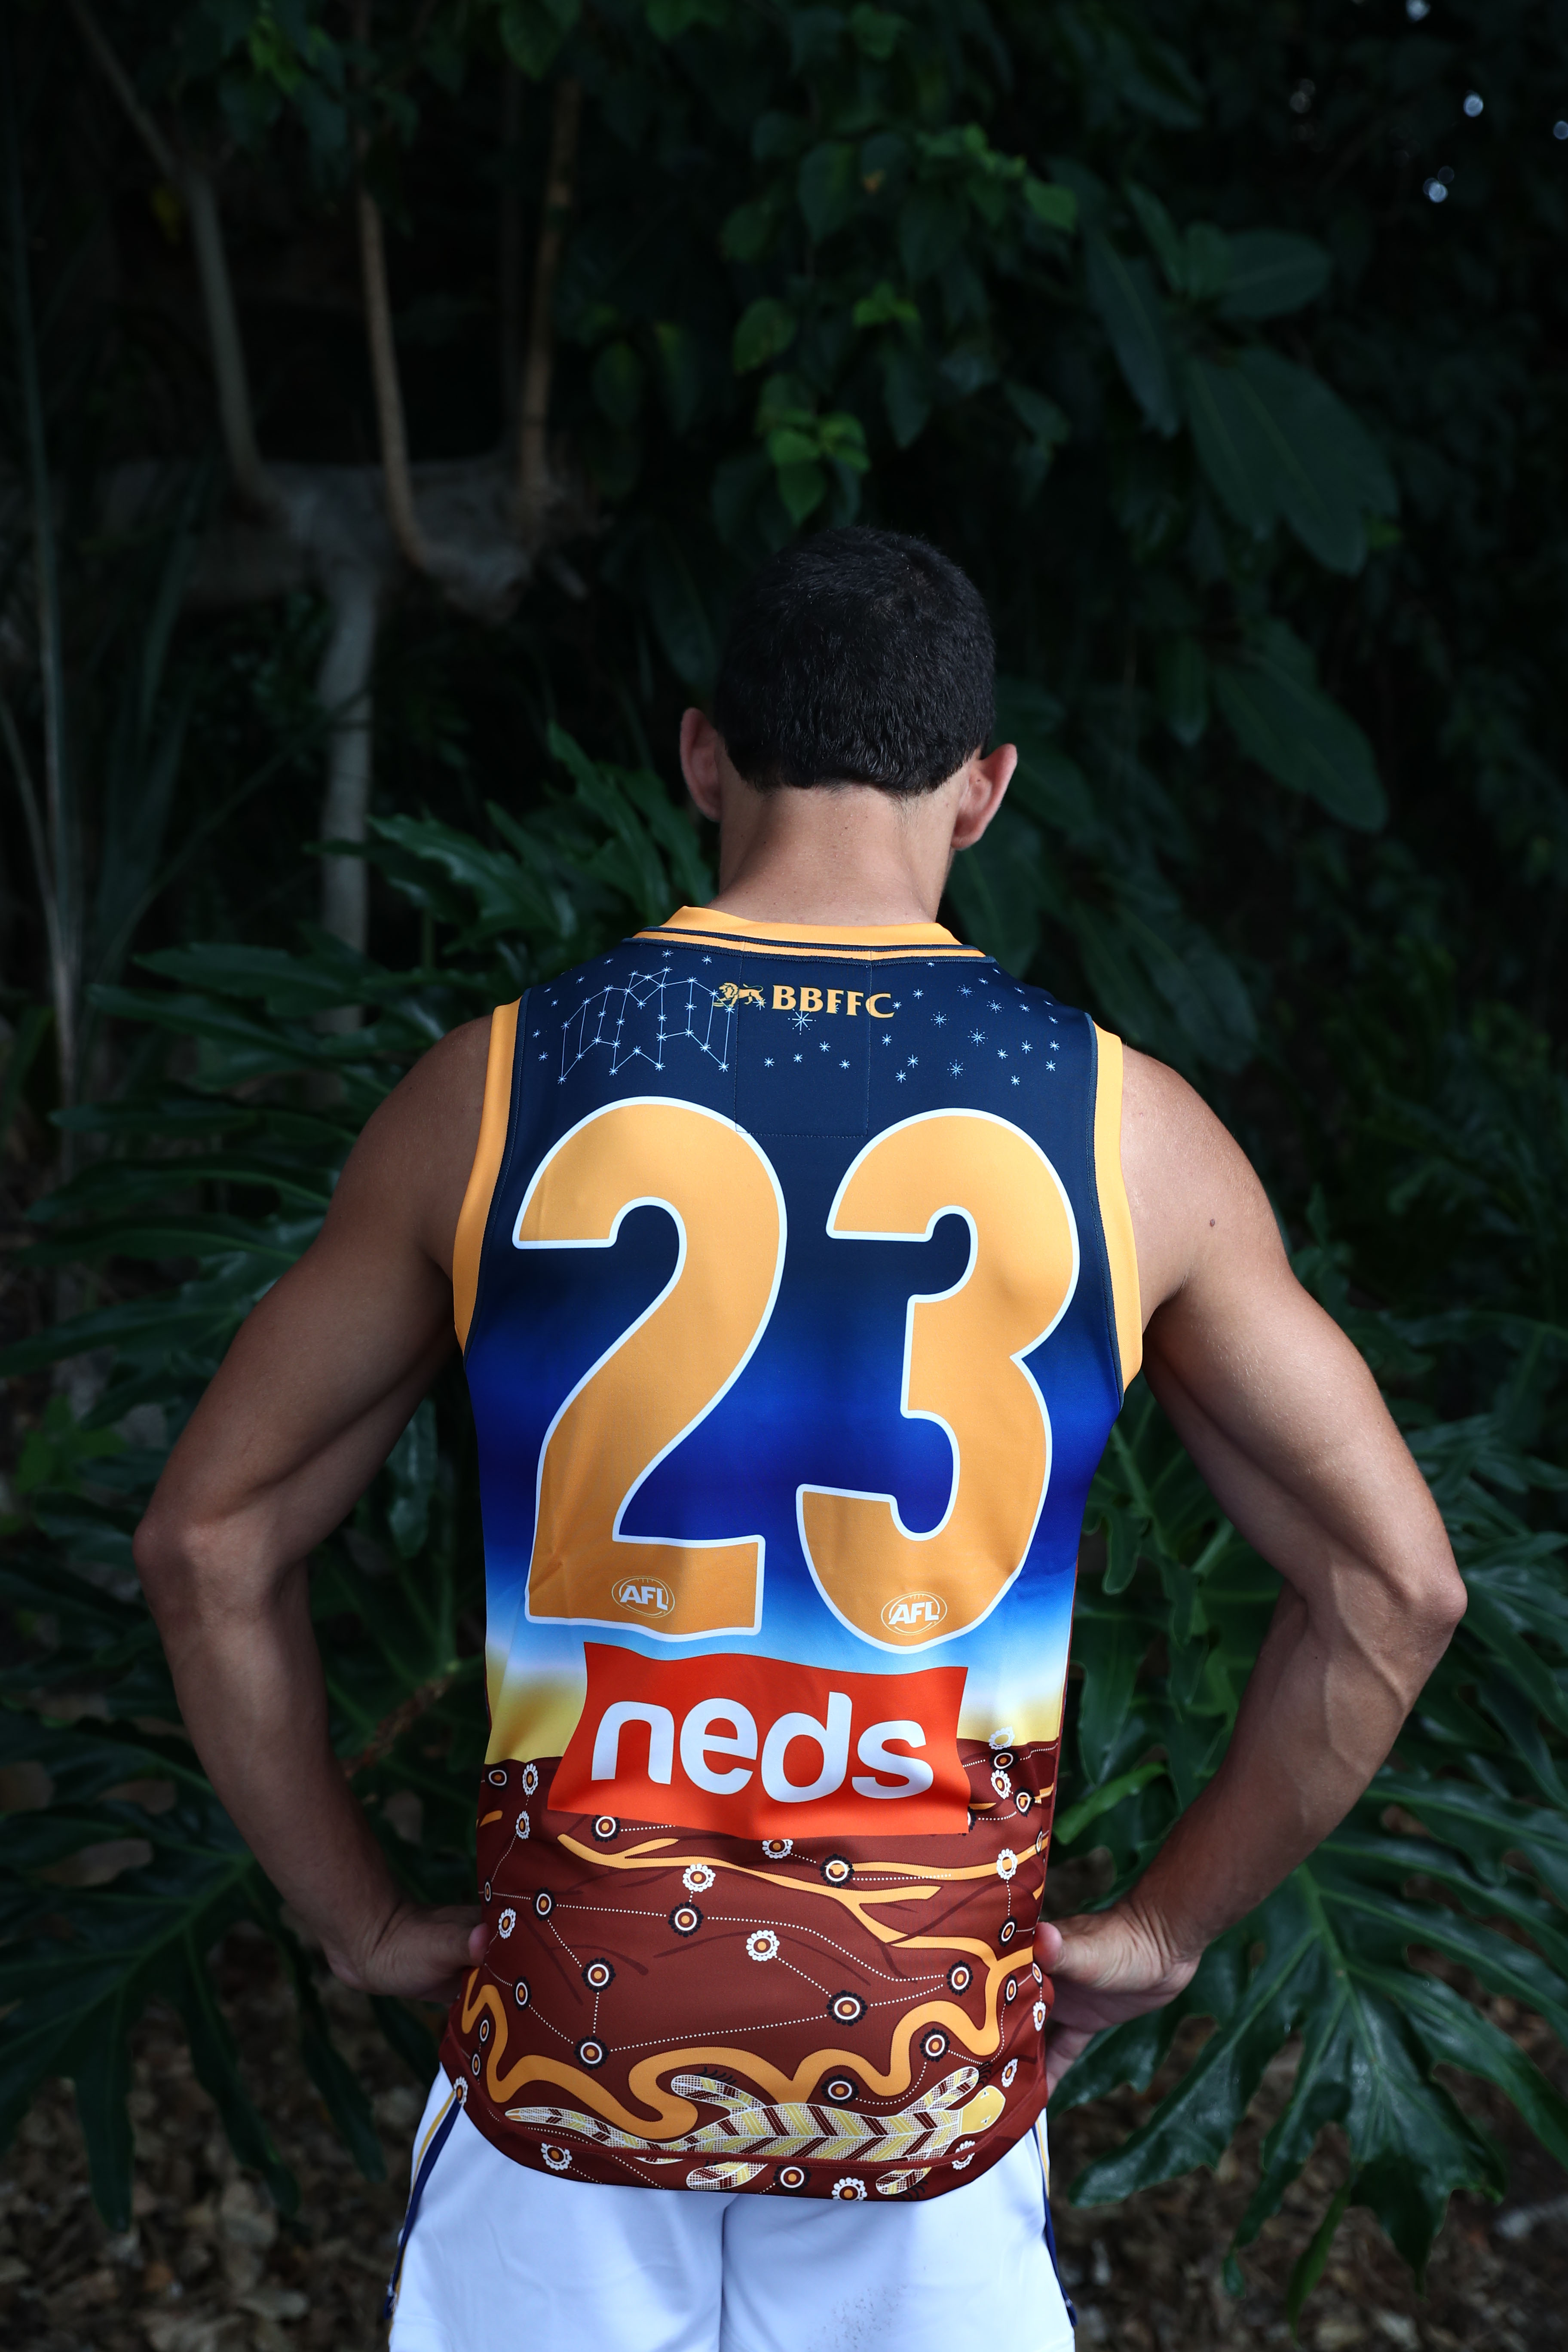 Indigenous Guernsey Gallery